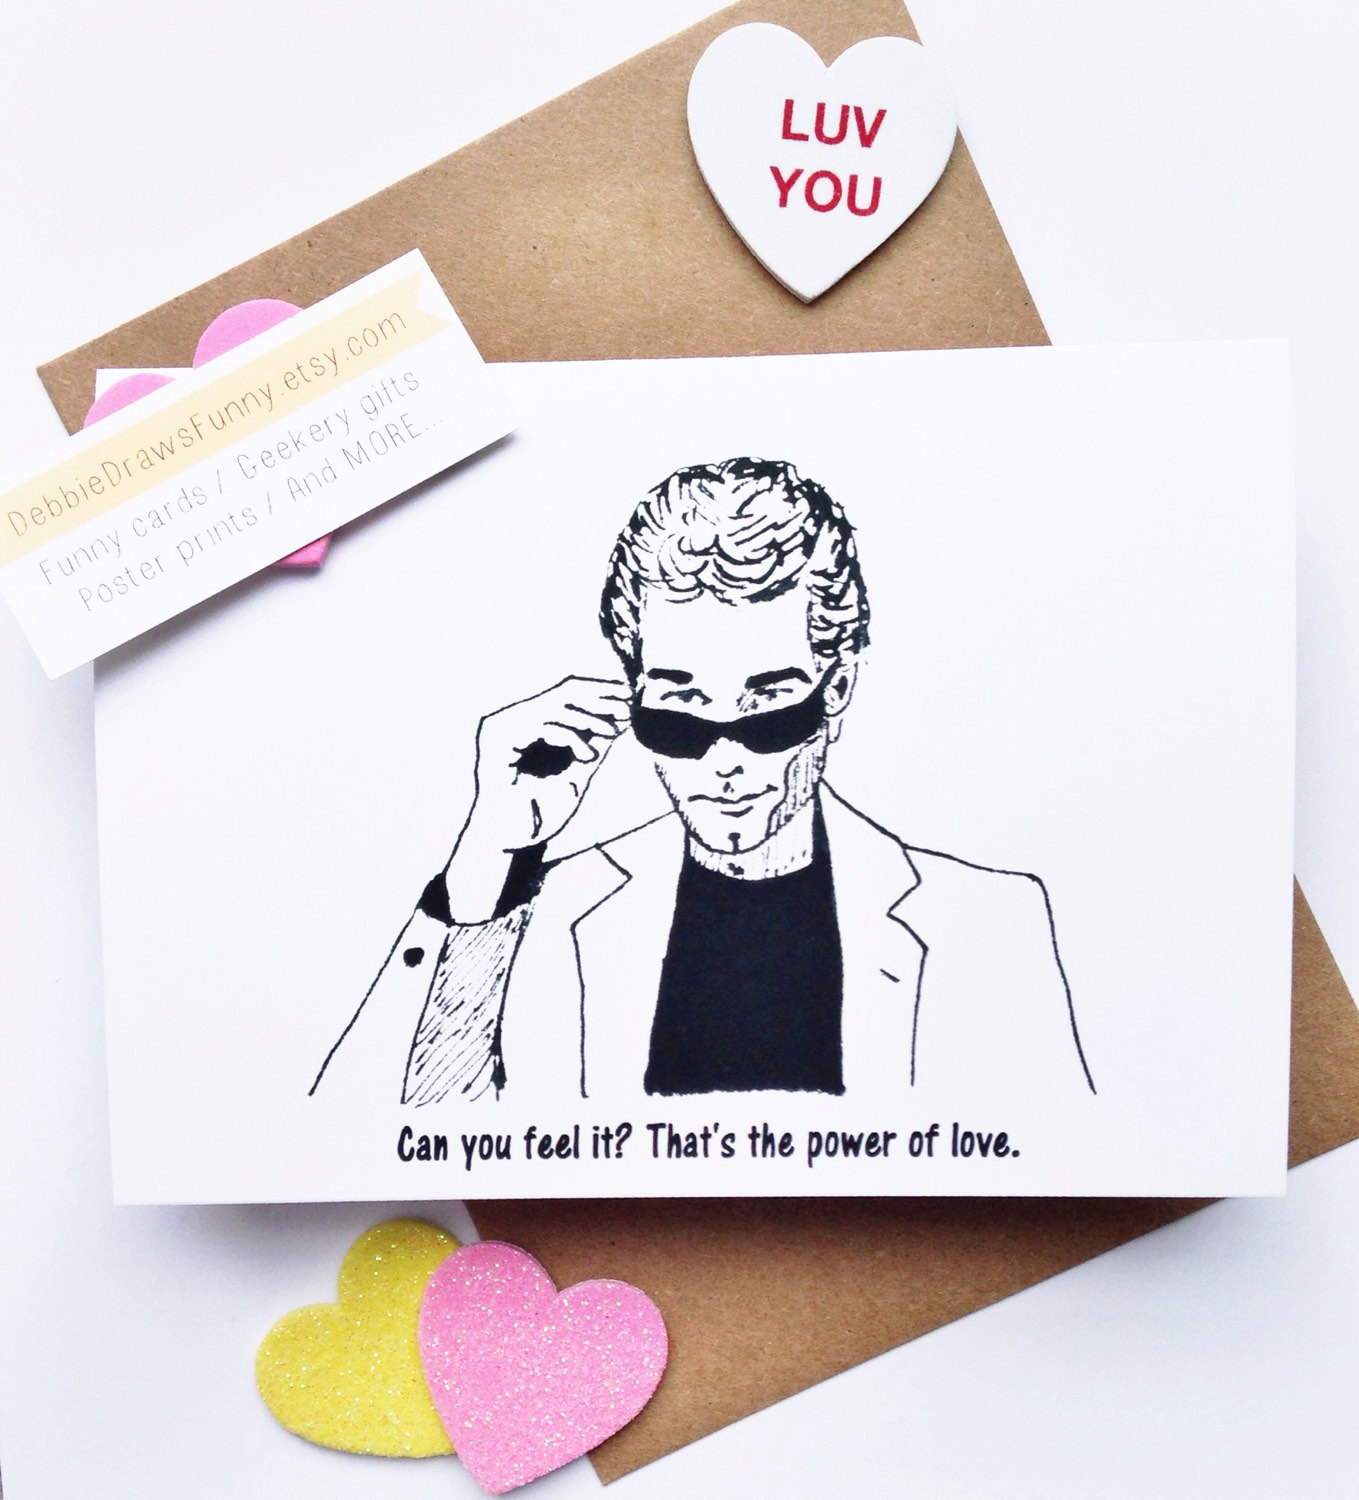 huey lewis valentines day card power of love - via funny valentine cards etsy from EmmalineBride.com